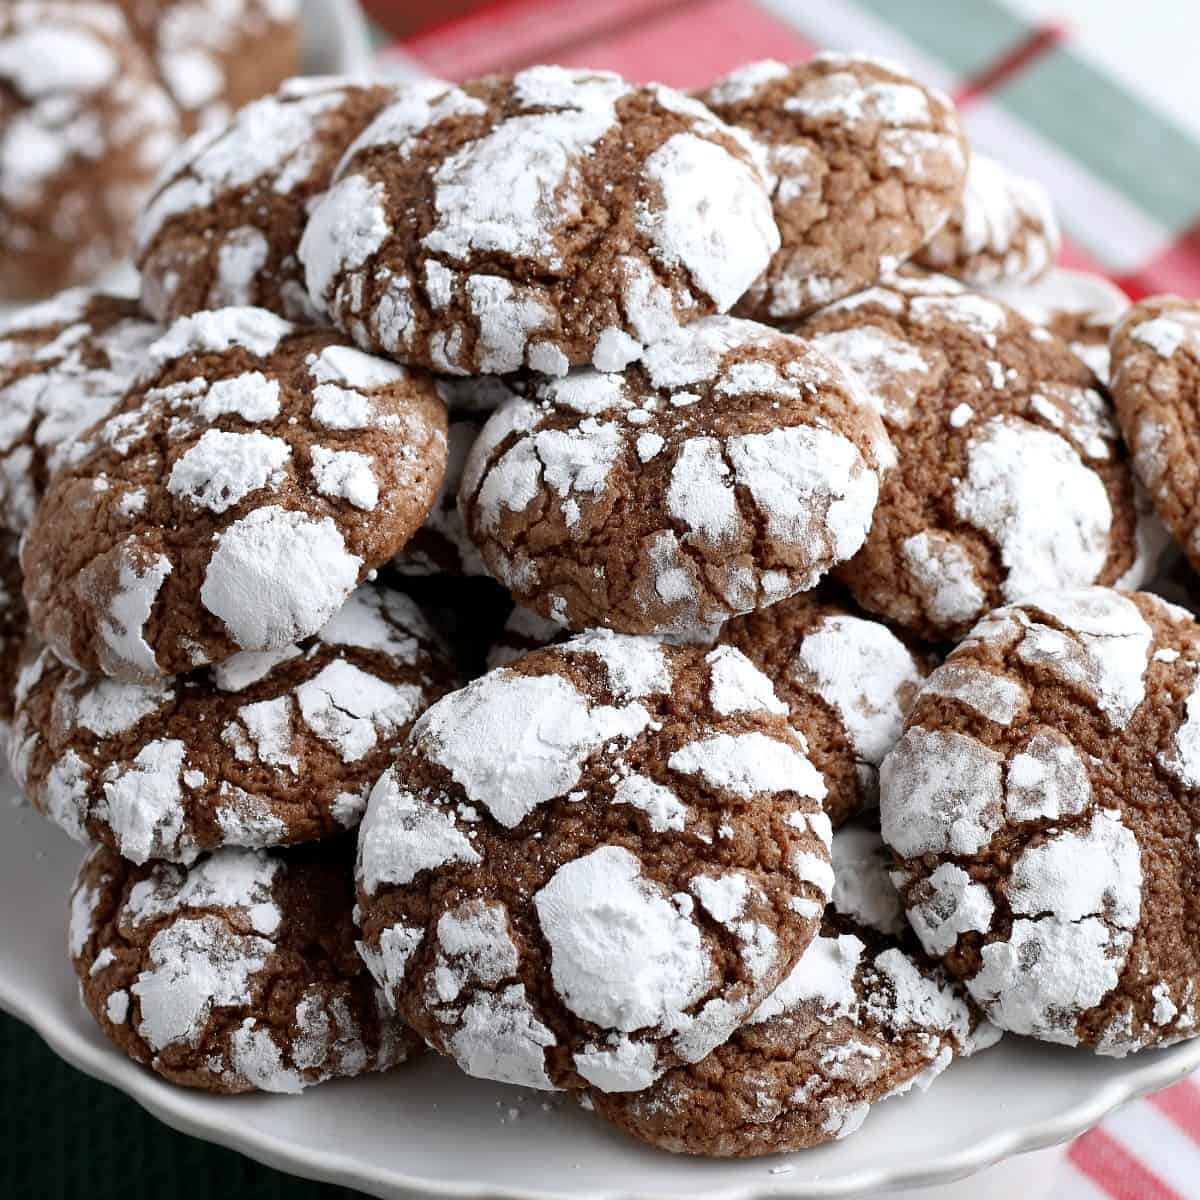 Closeup of chocolate crackled cookies piled on a white plate.